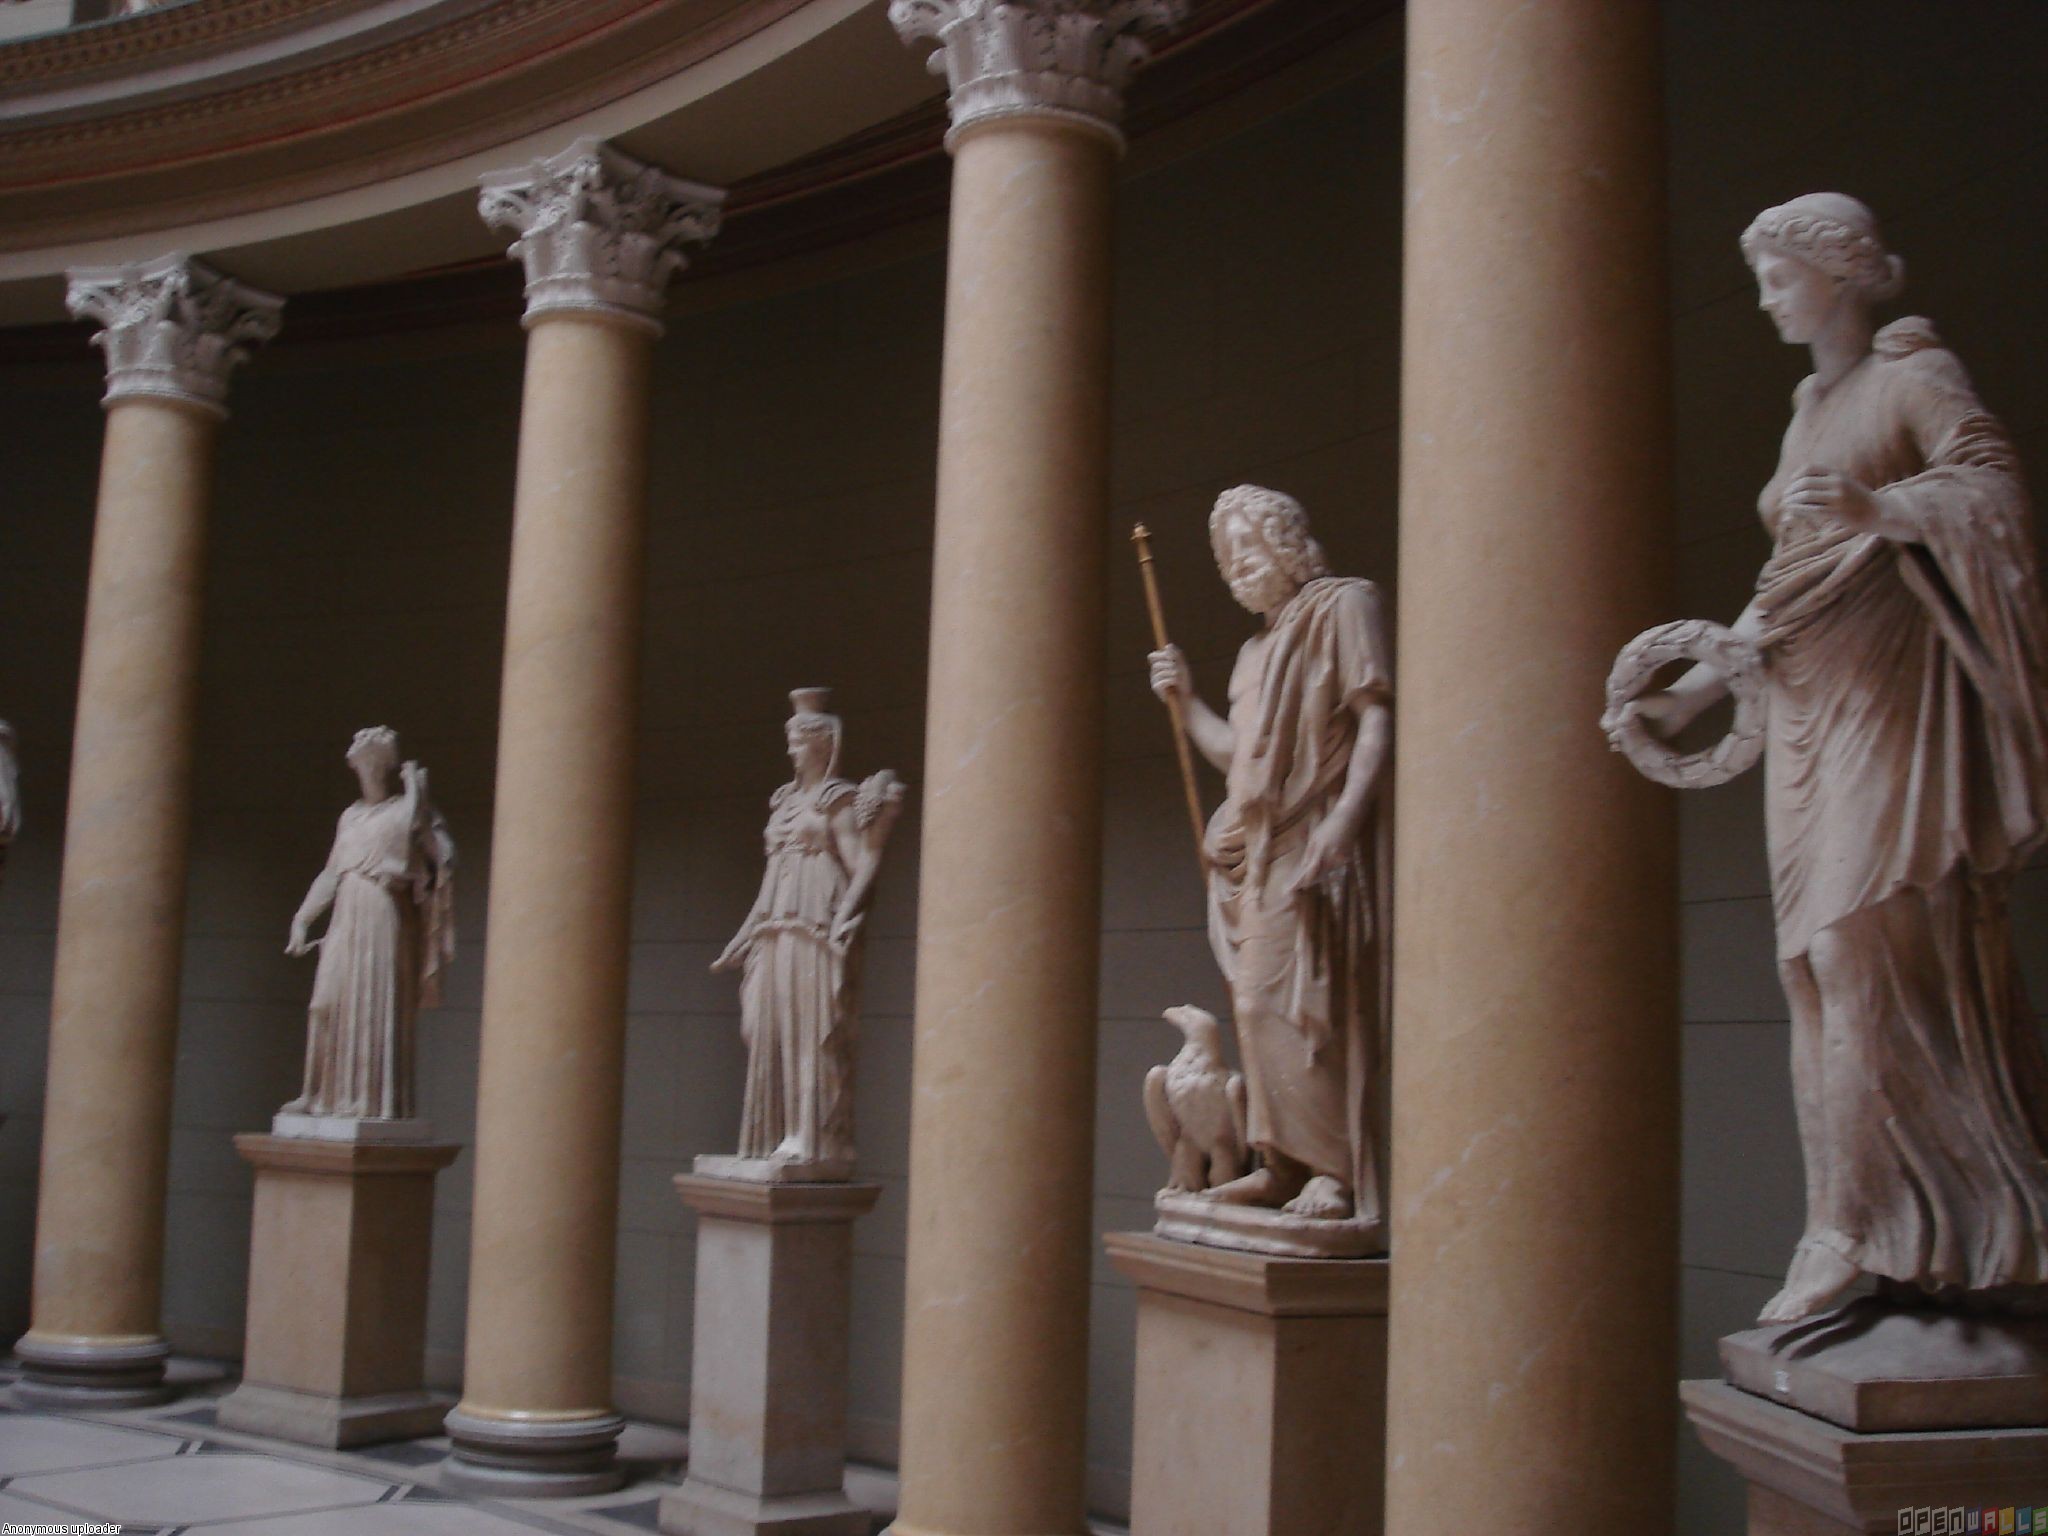 A row of statues of Greek gods and goddesses, including Zeus, Hera, Athena, and Aphrodite, is displayed in a hall with columns.